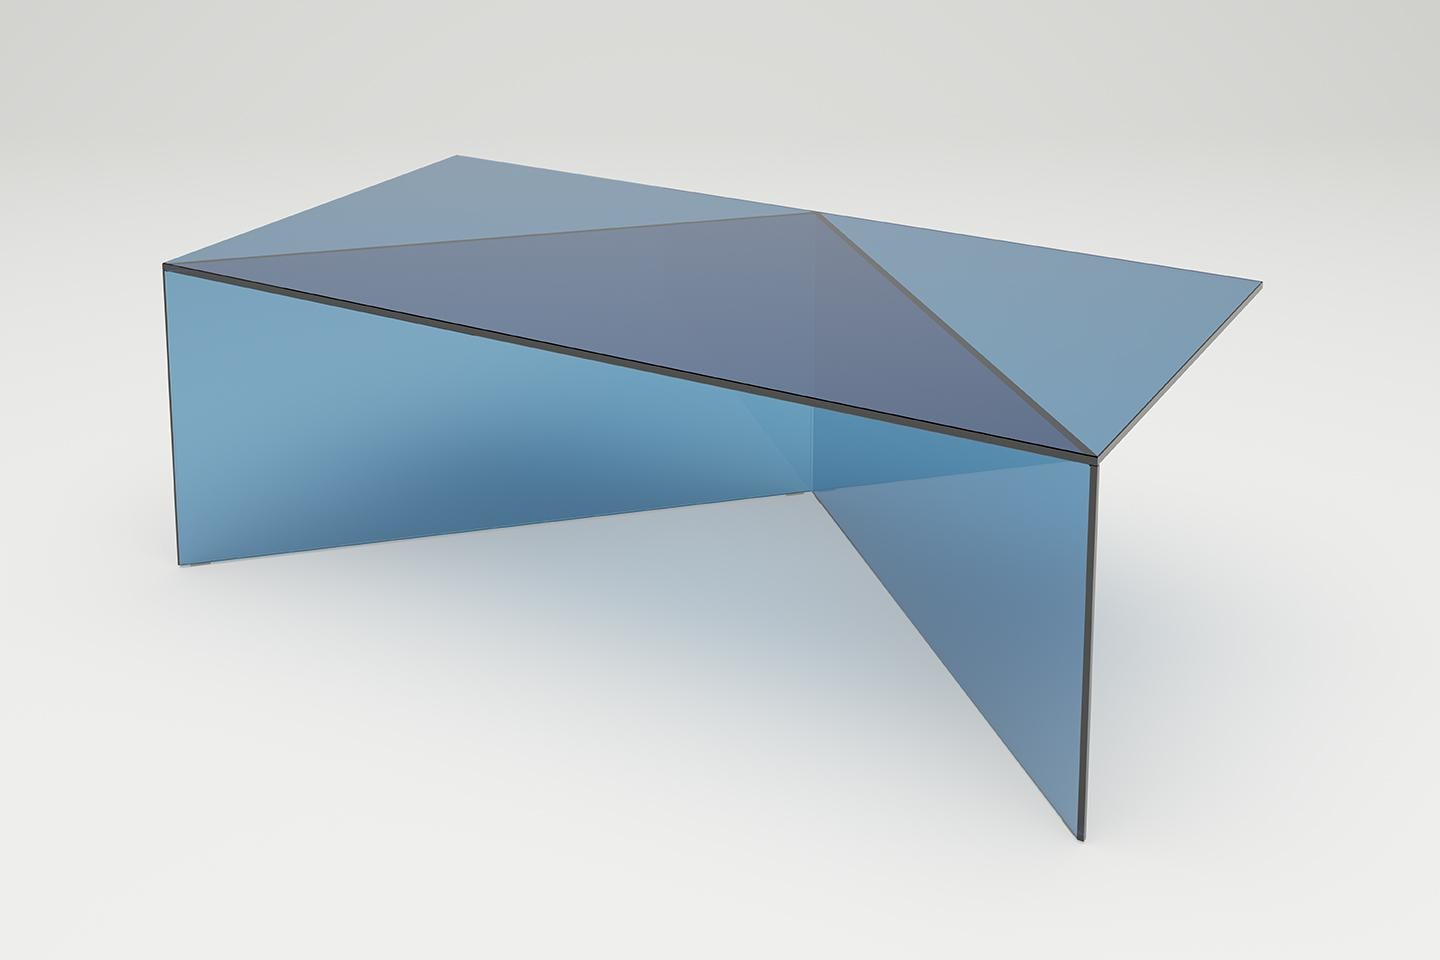 Blue Clear glass poly oblong Coffe table by Sebastian Scherer
Dimensions: D120 x W60 x H40 cm
Materials: Solid coloured glass.
Weight: 34.4 kg.
Also Available: Colours:Clear white (transparent) / clear green / clear blue / clear bronze / clear